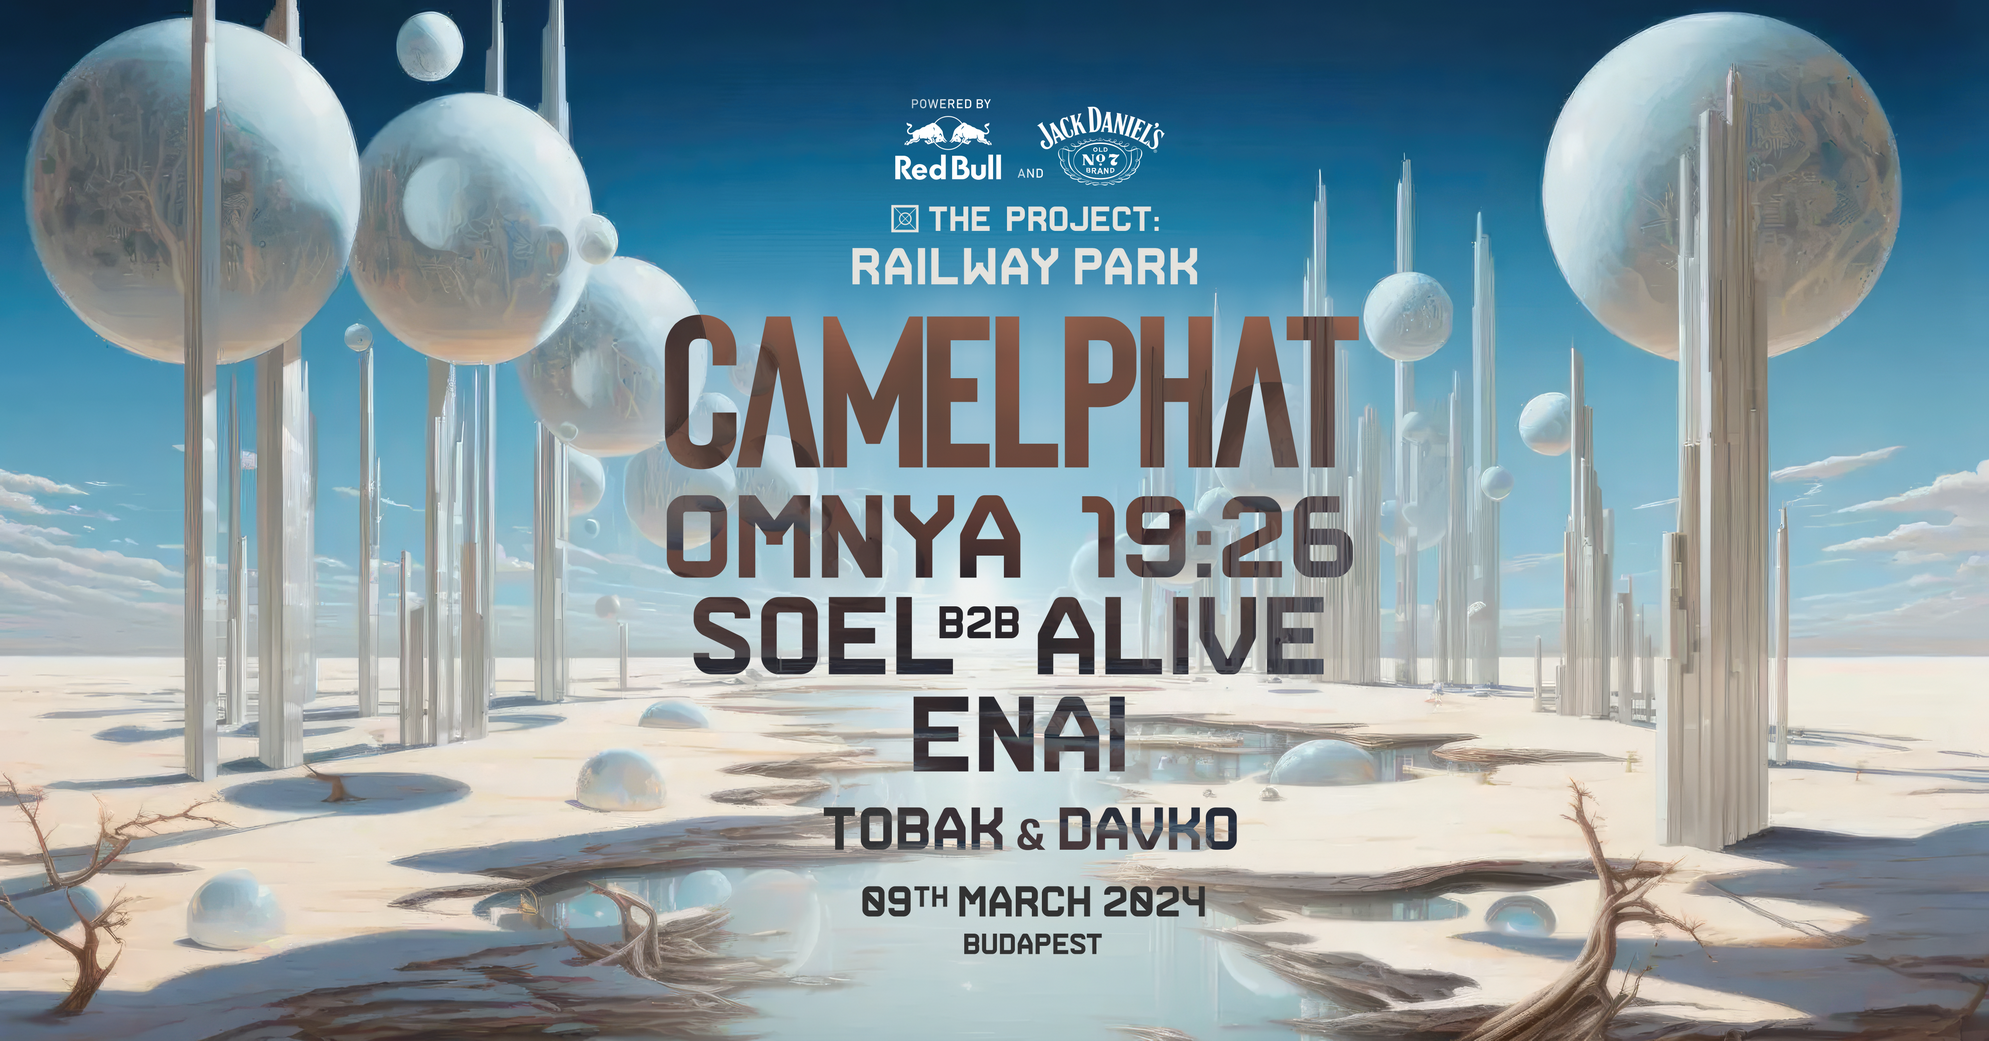 The Project: Railway Park with CamelPhat - Página frontal